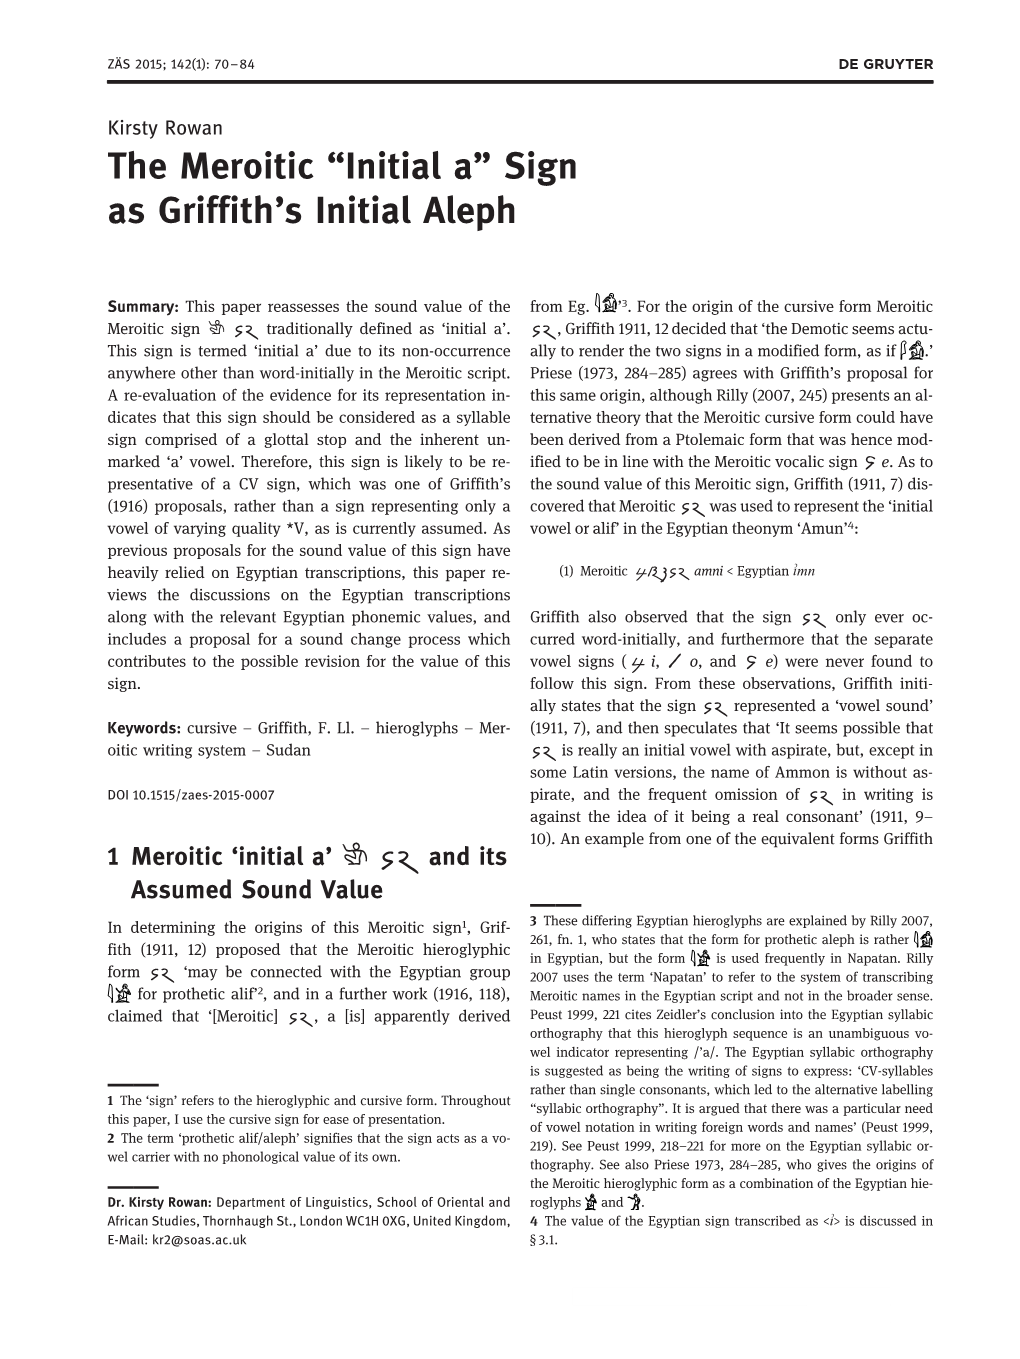 The Meroitic “Initial A” Sign As Griffith’S Initial Aleph